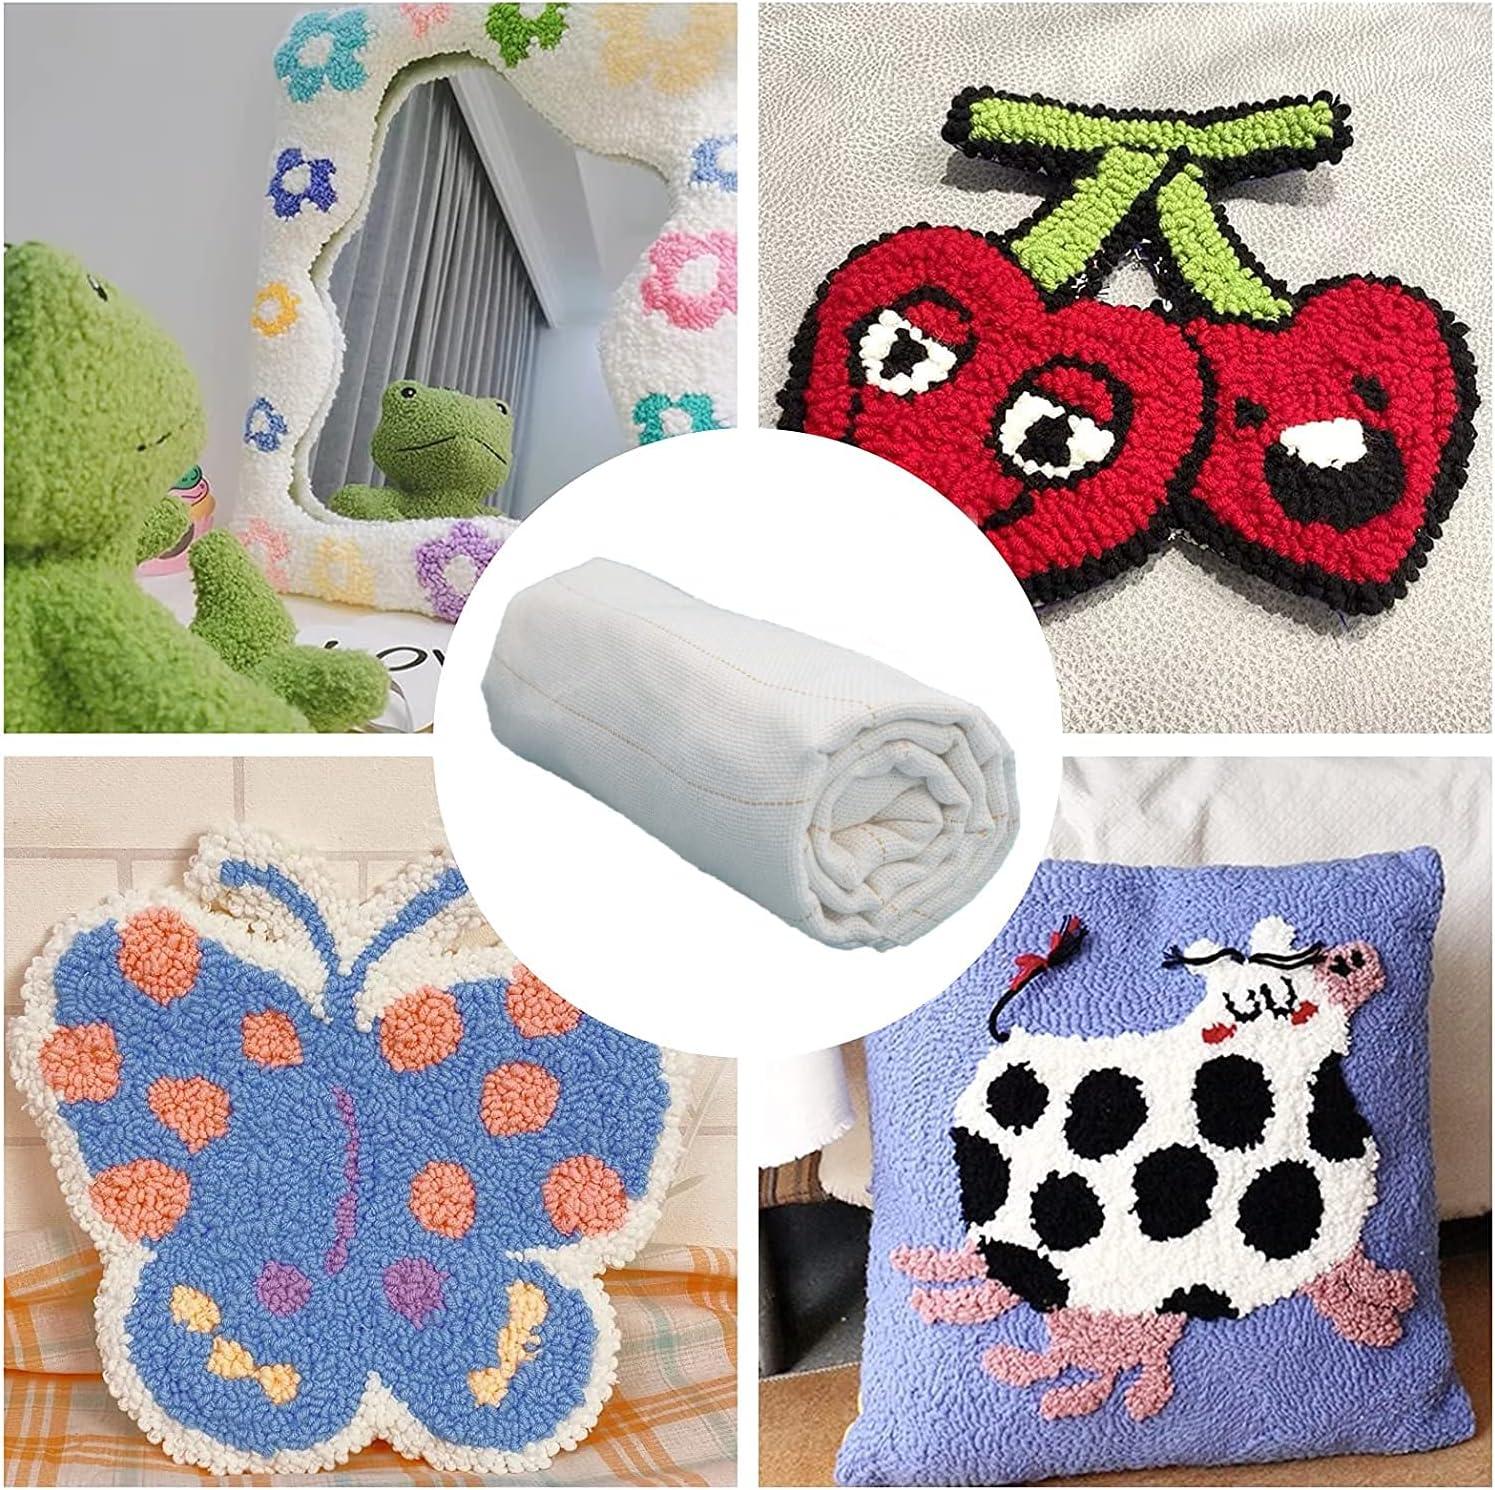 1*5M/1.5*4M Primary Tufting Cloth Monk Cloth Backing Fabric For Carpet  Weaving Knitting Material Rug Tufting Gun Embroidery - AliExpress